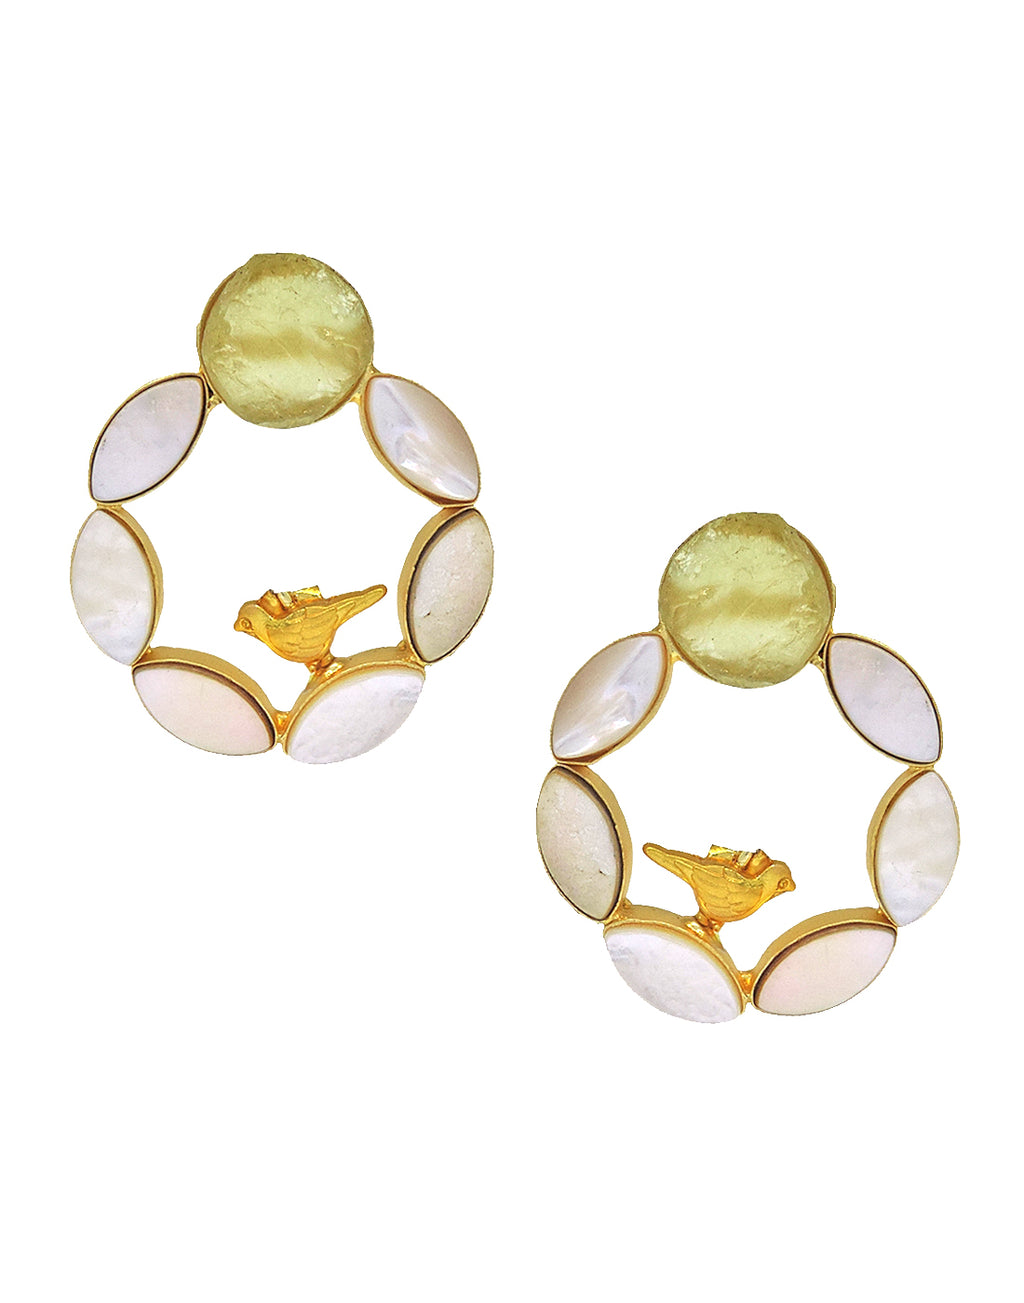 Pearl Cage Earrings (Citrine) - Statement Earrings - Gold-Plated & Hypoallergenic - Made in India - Dubai Jewellery - Dori